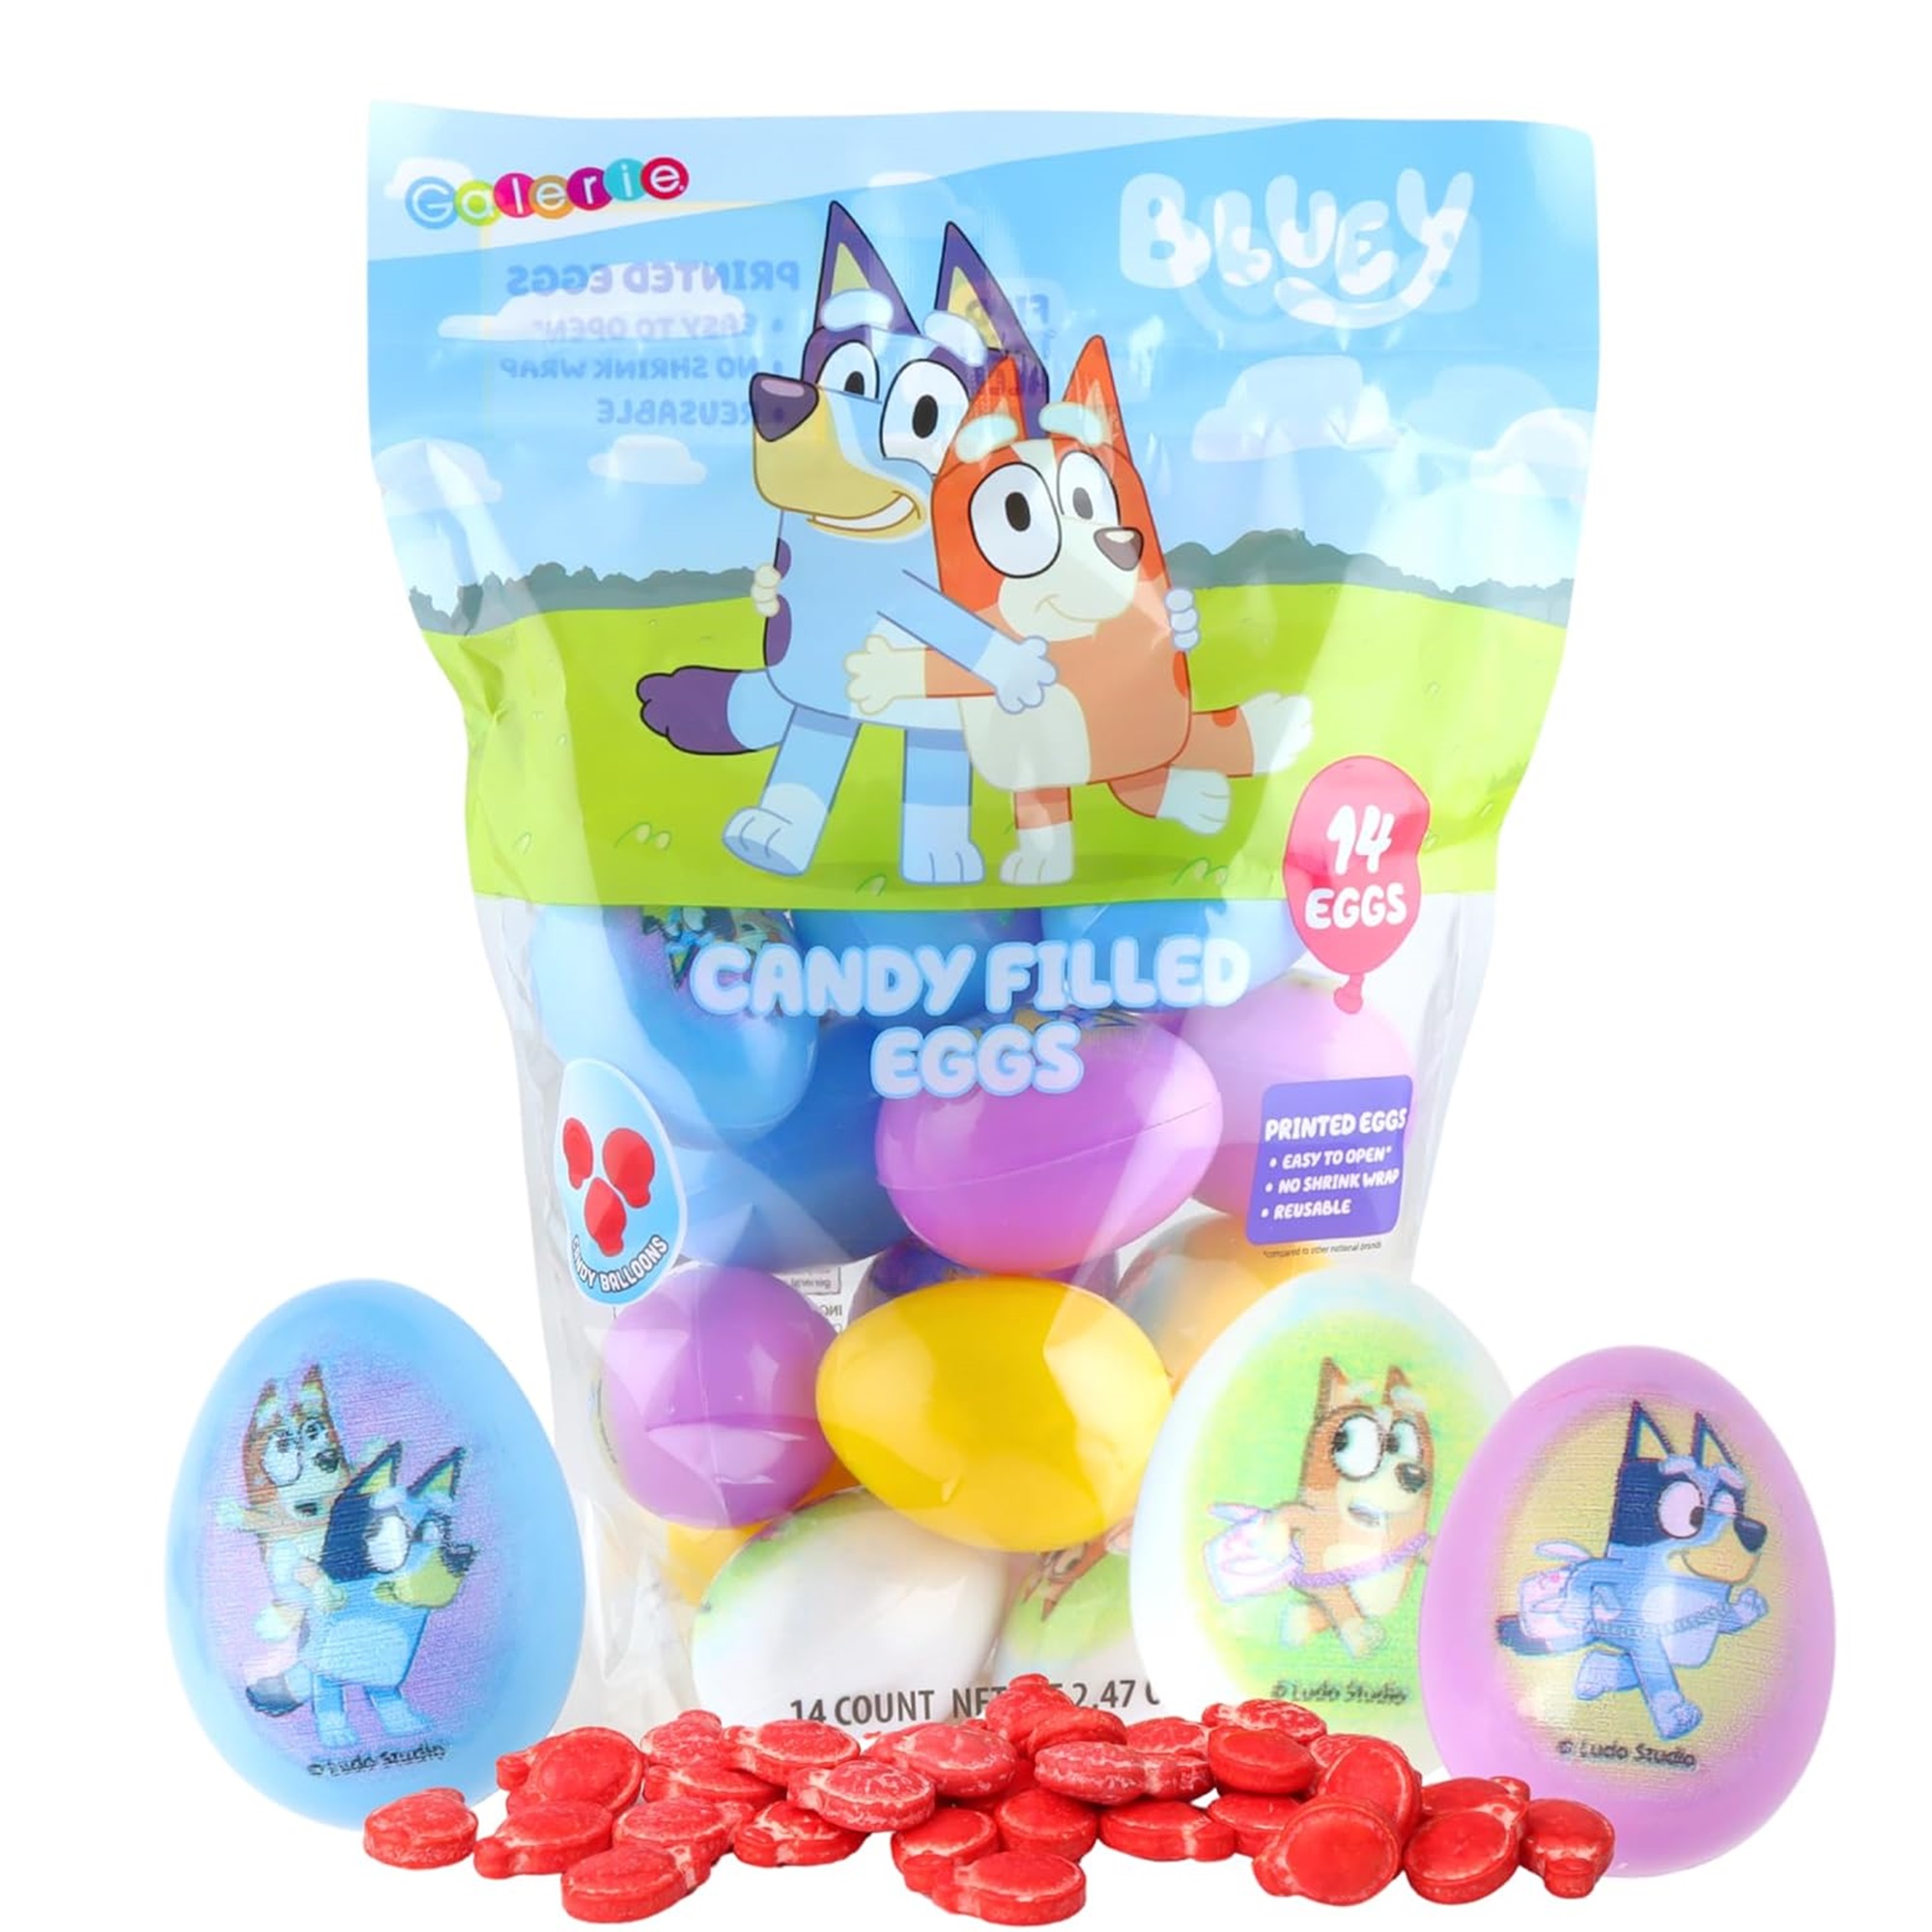 Bluey 14ct Printed Easter Eggs with Candy, 2.47 Ounces - image 1 of 7